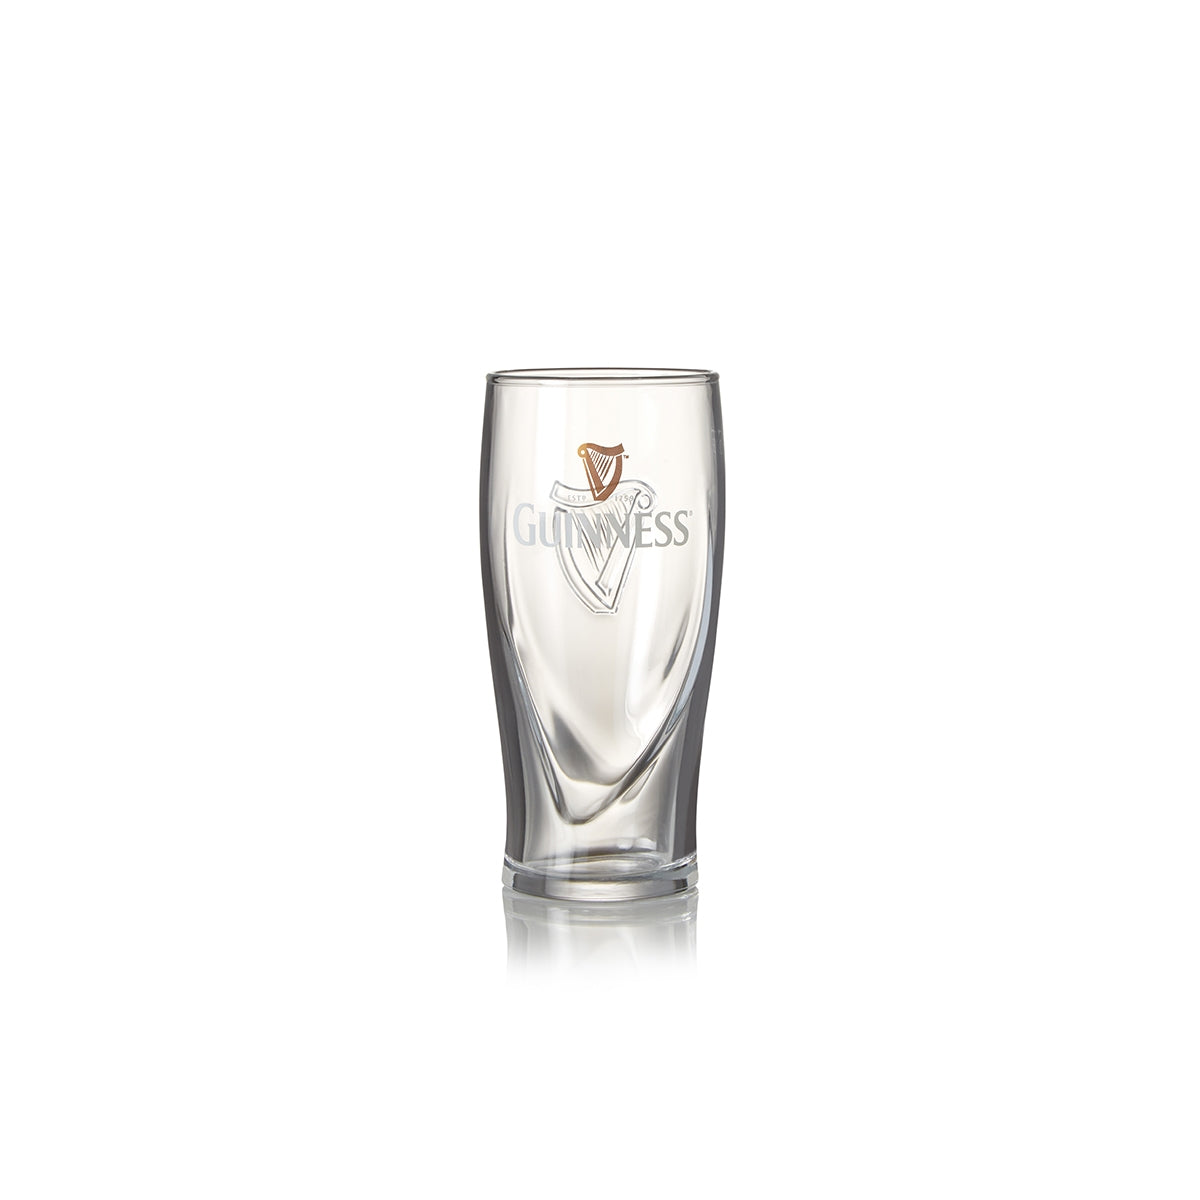 A Guinness Half Pint Glass 12 Pack on a white background.